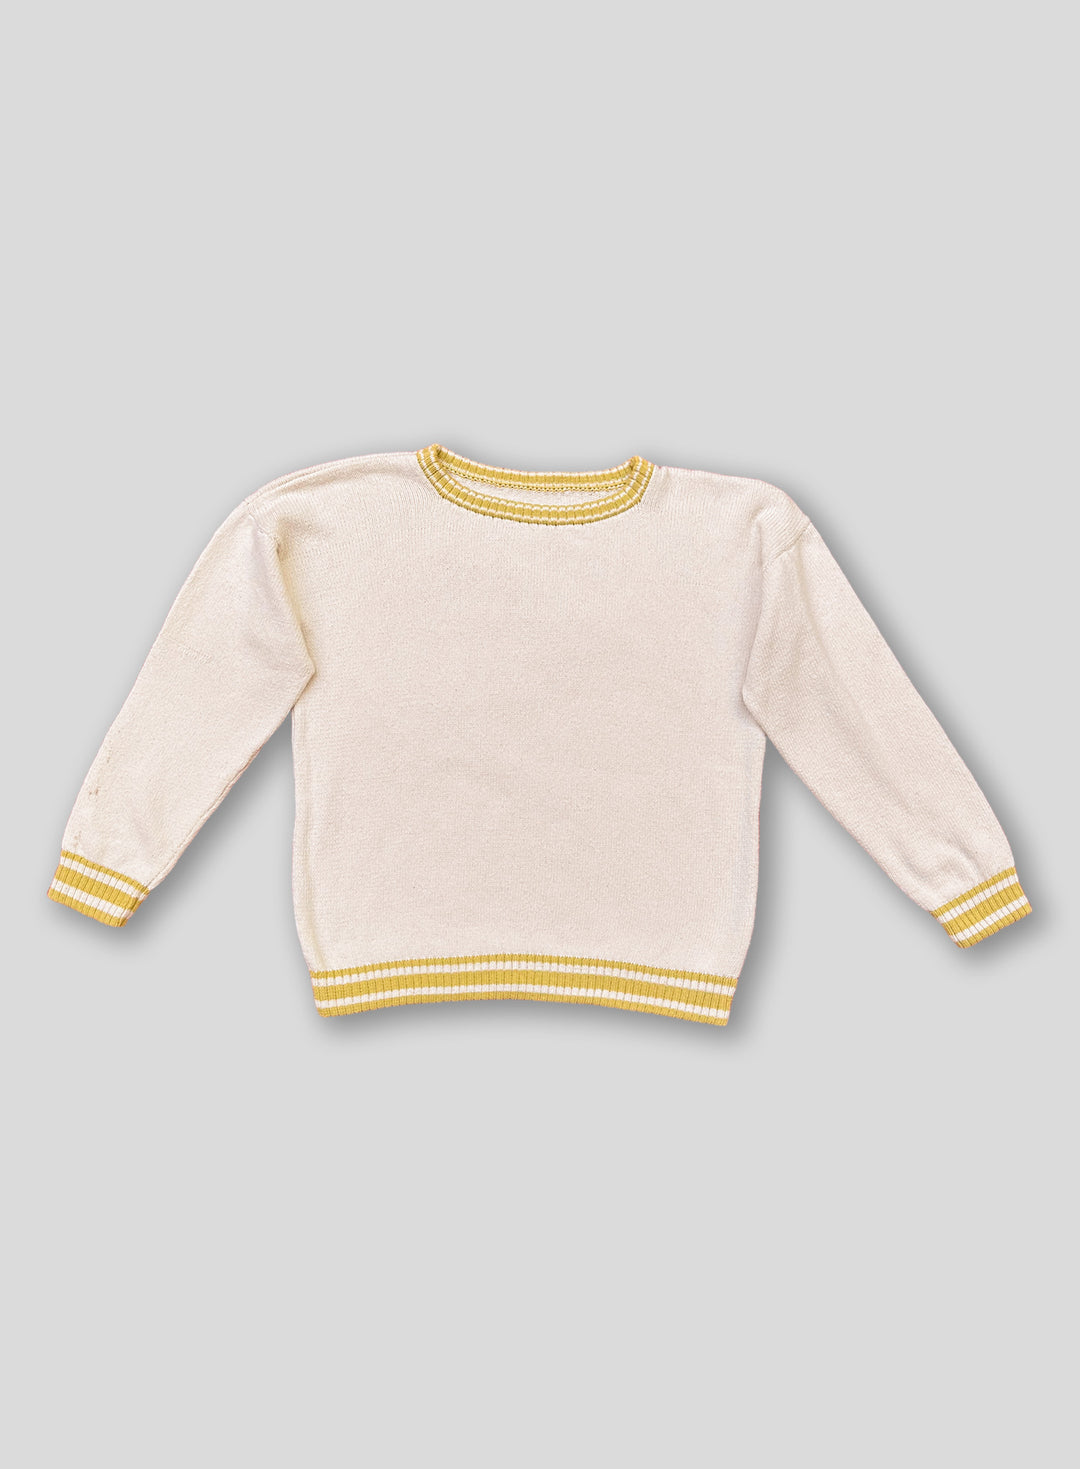 Undyed and Yellow Knit Crewneck Pullover